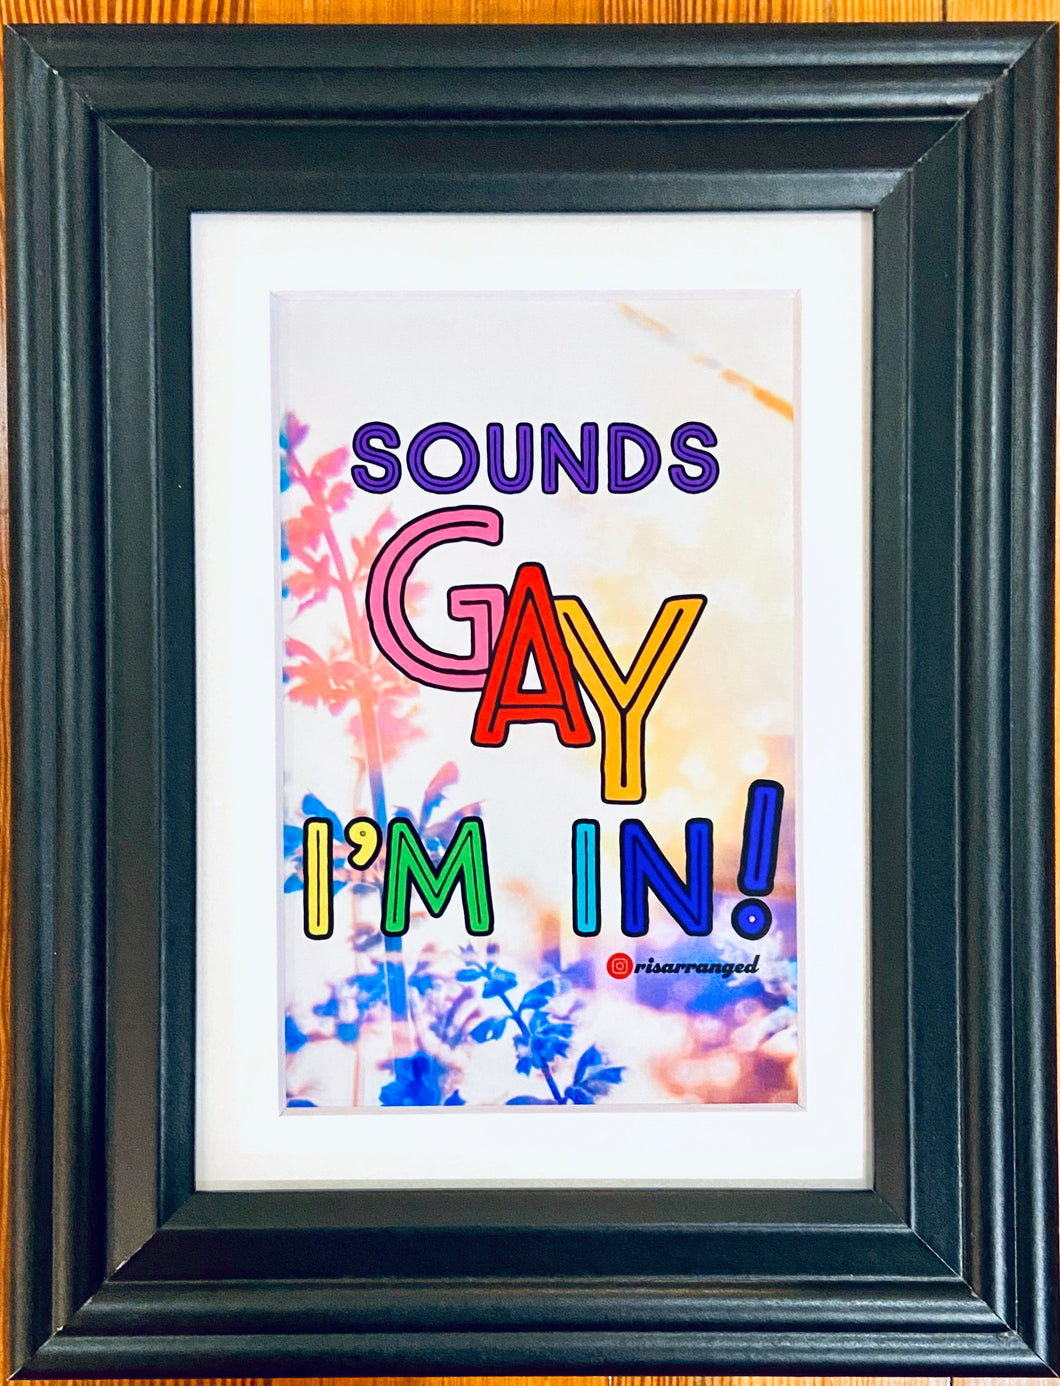 Sounds Gay, I'm In Framed Photographic Art Print